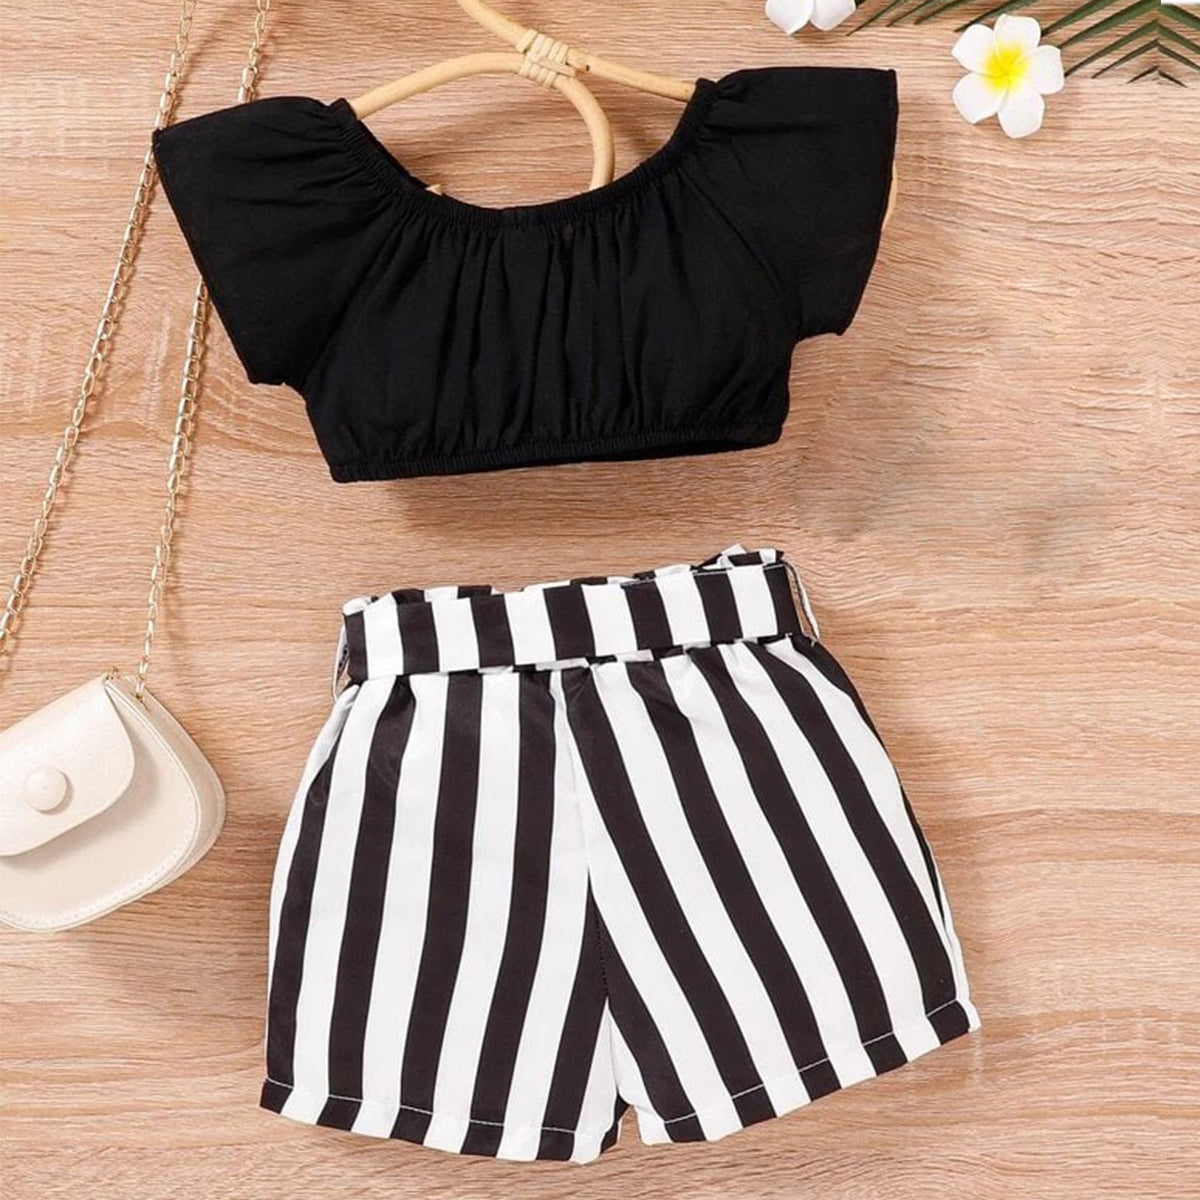 Babydoll Black Puff Sleeve Top & Striped Belted Shorts For Baby Girls.